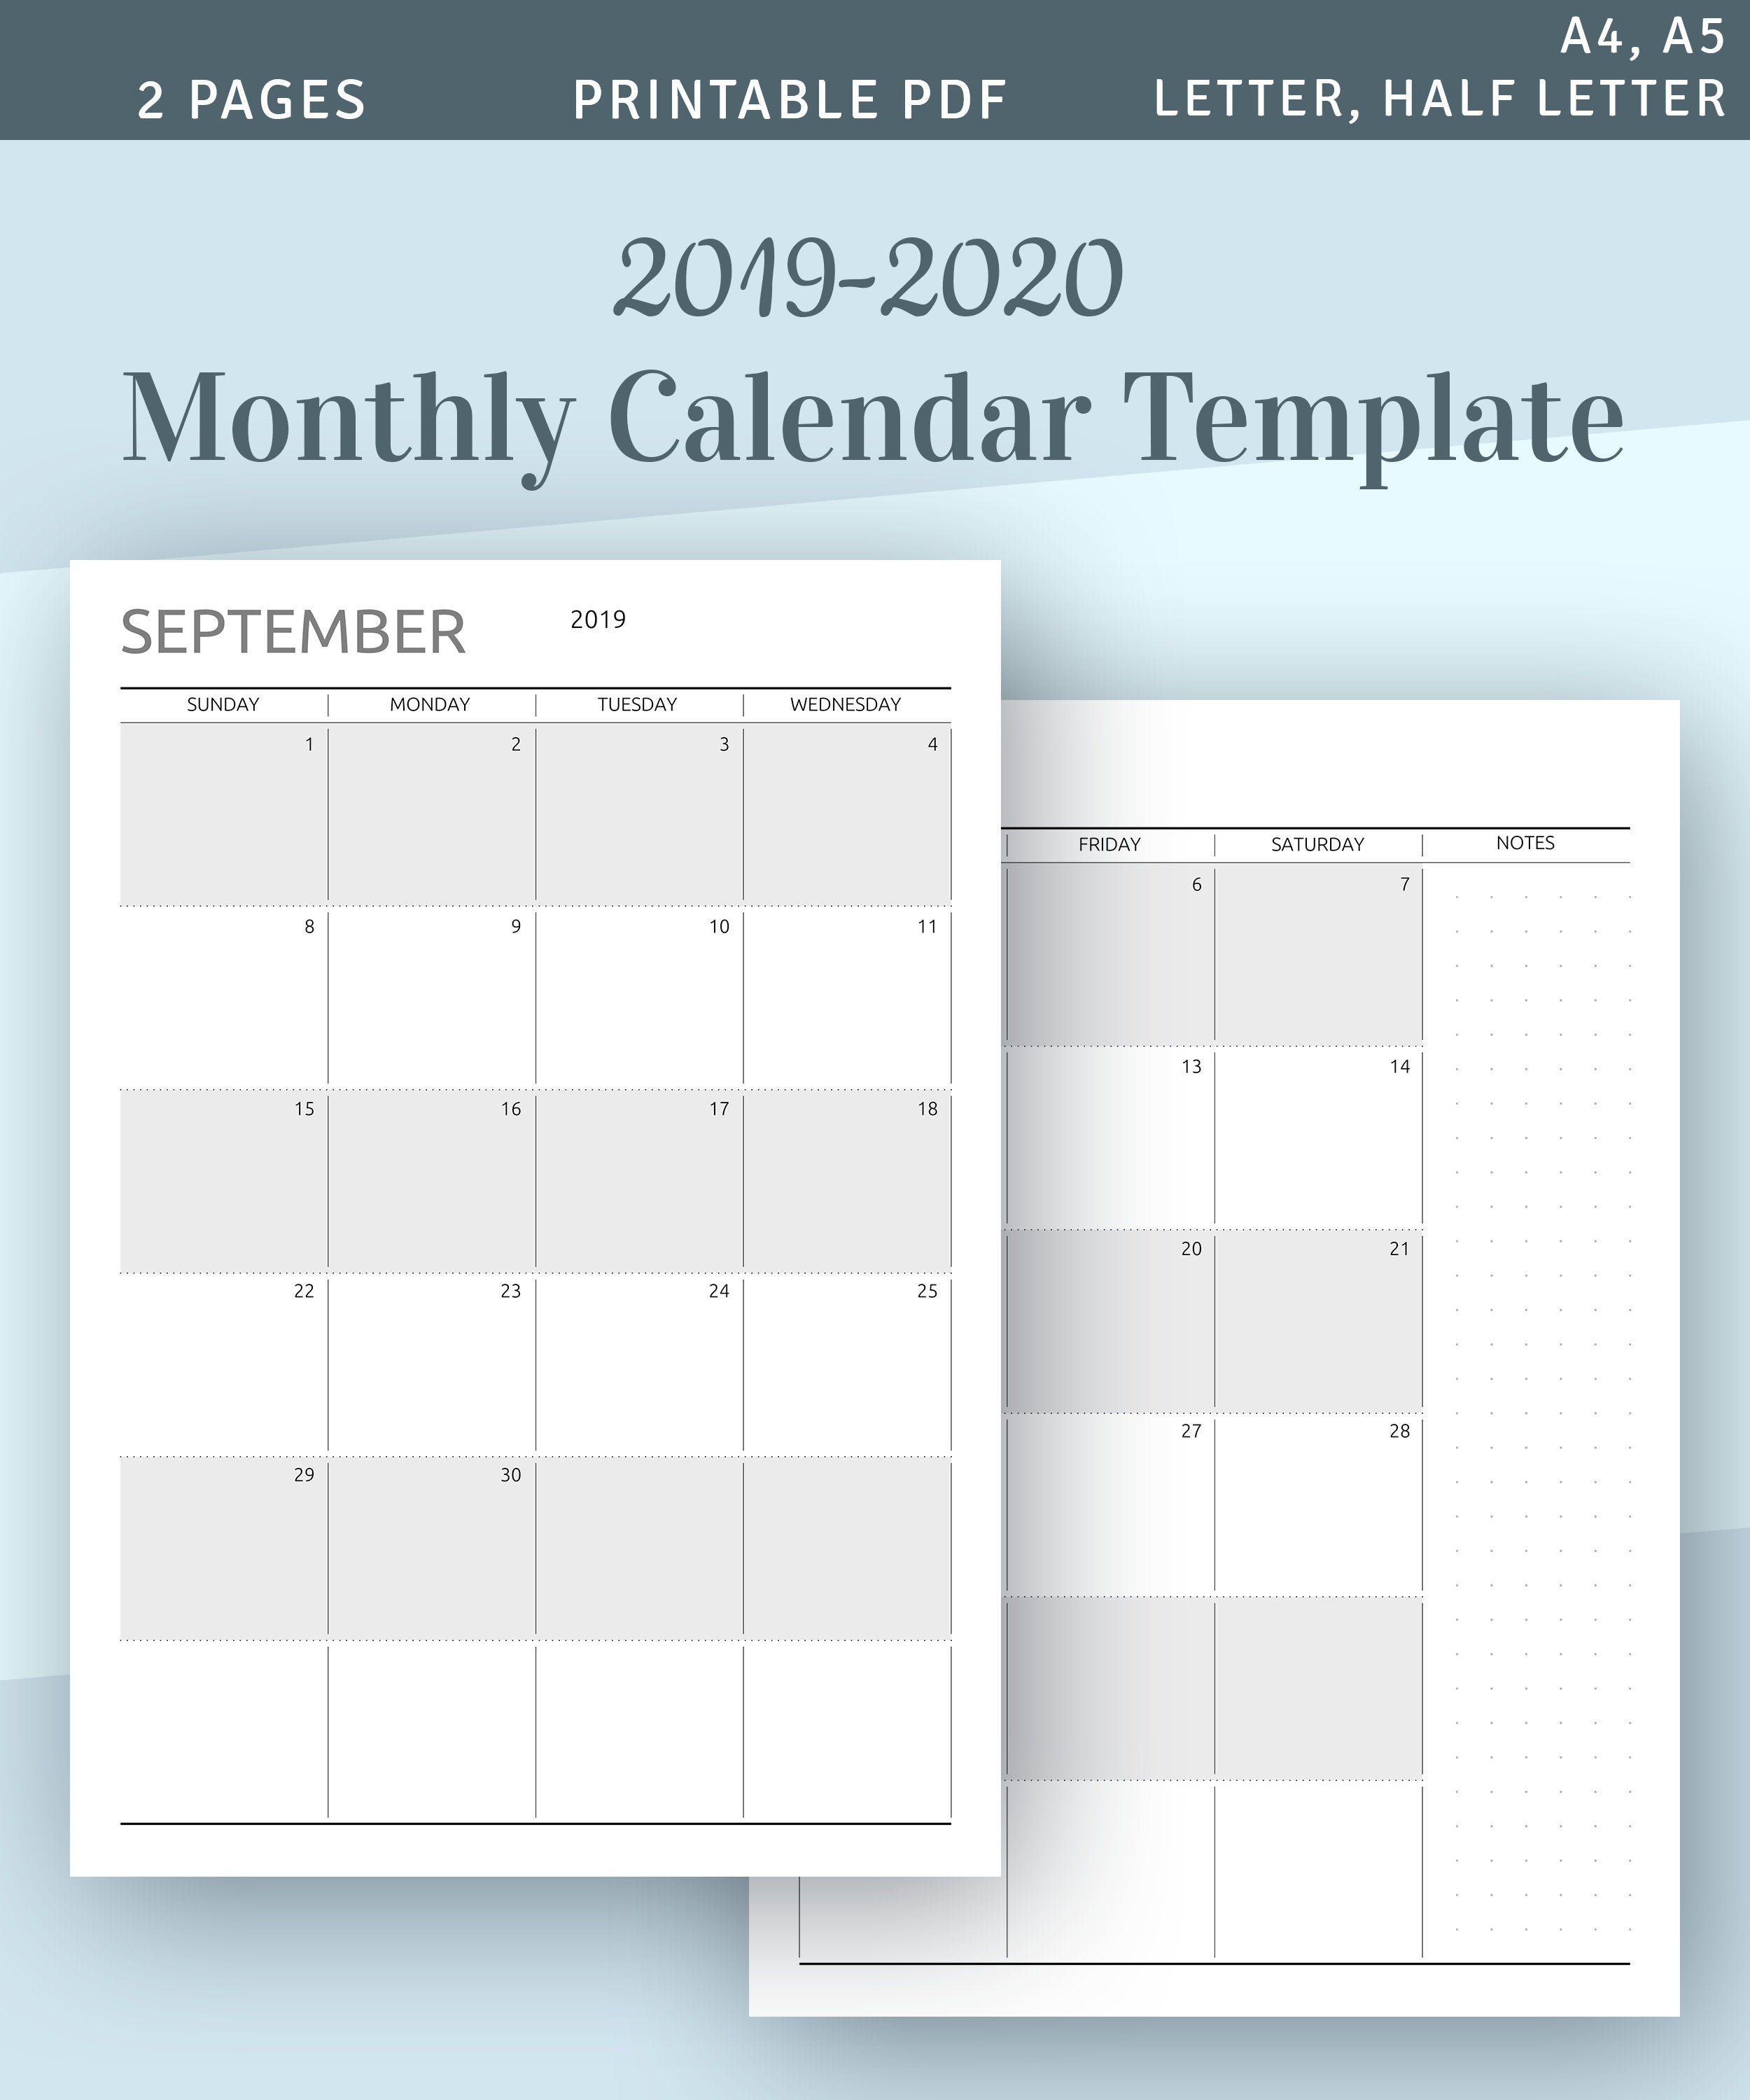 2019 - 2020 Monthly Calendar Printable Template, Download 2019 Calendar  Printable, Two Page Planner Insert Pdf, A4 A5 Letter Size Filofax